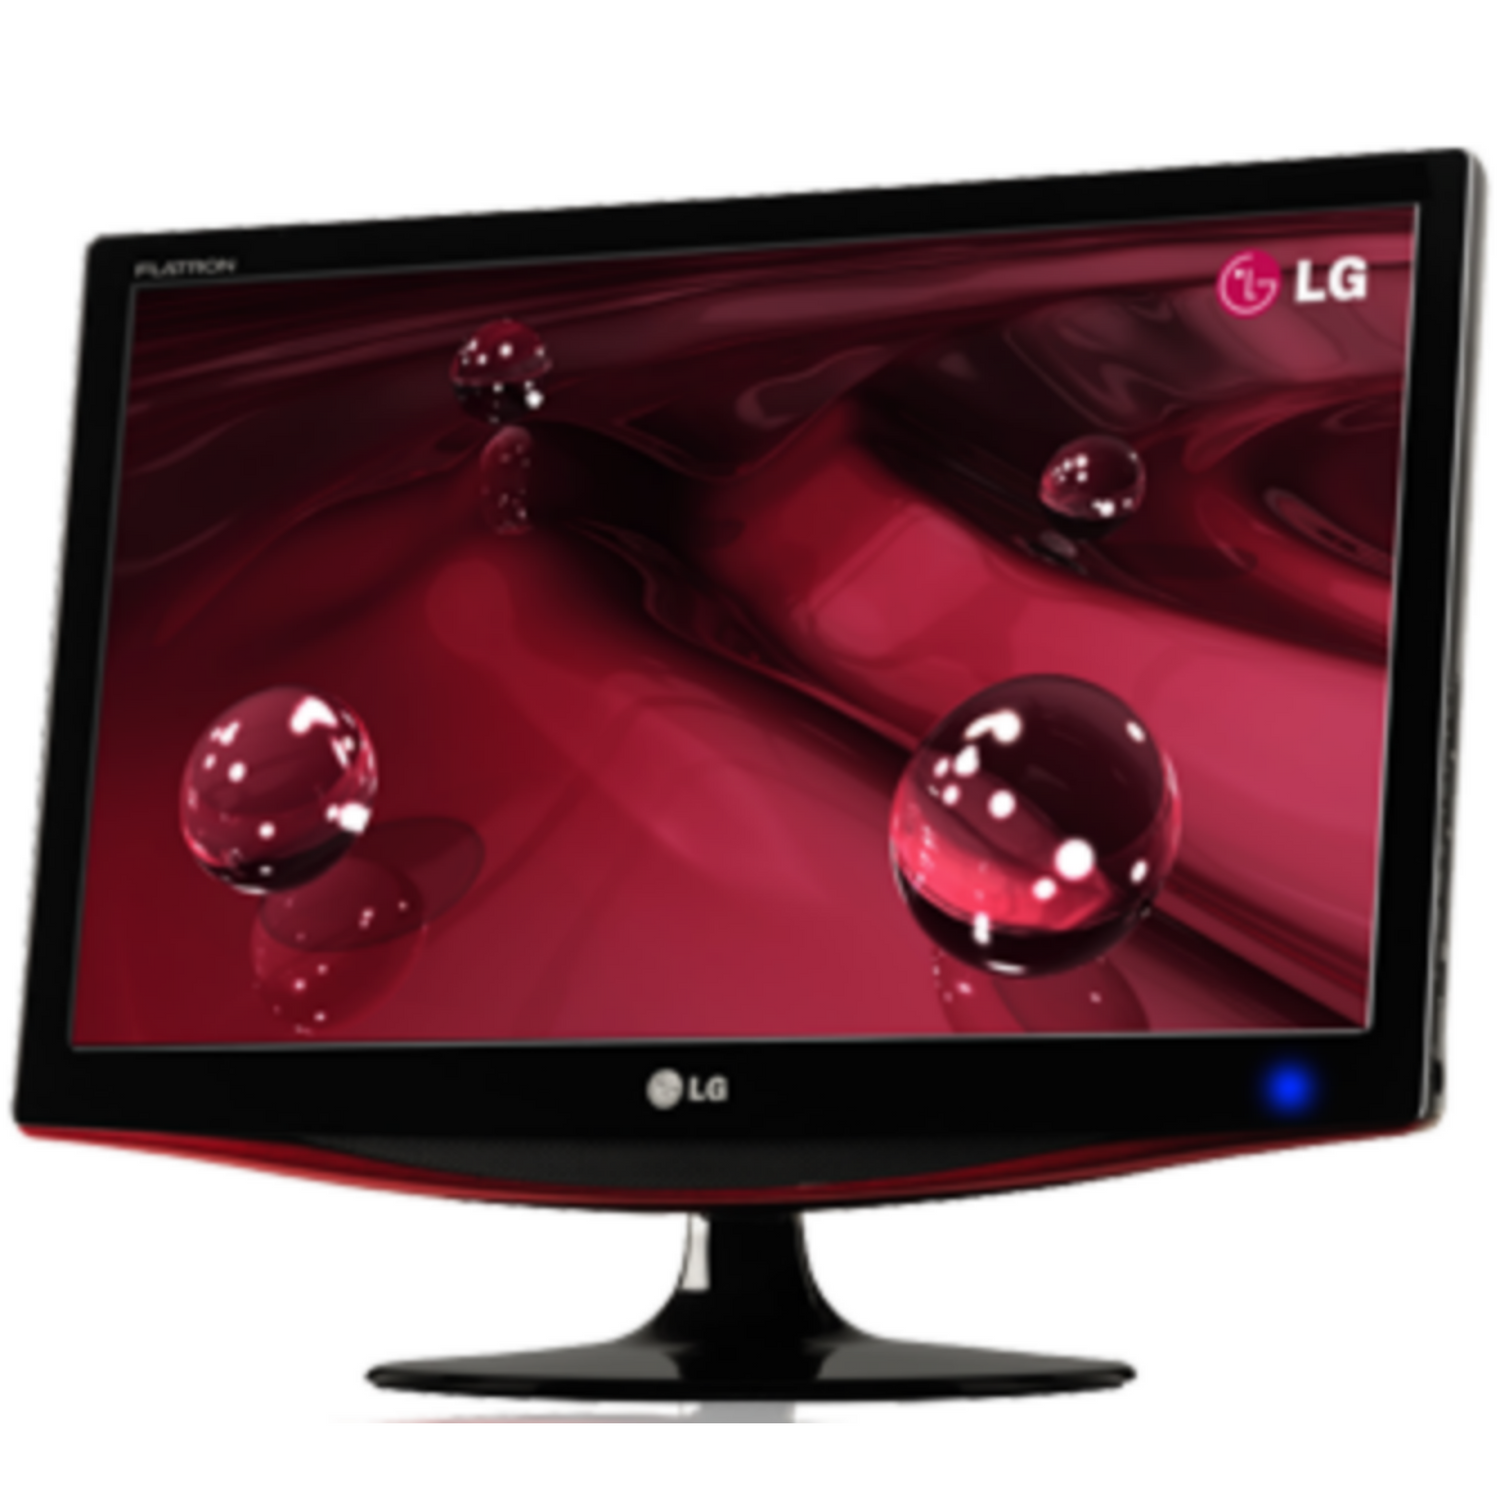 LG Foreign Used Television